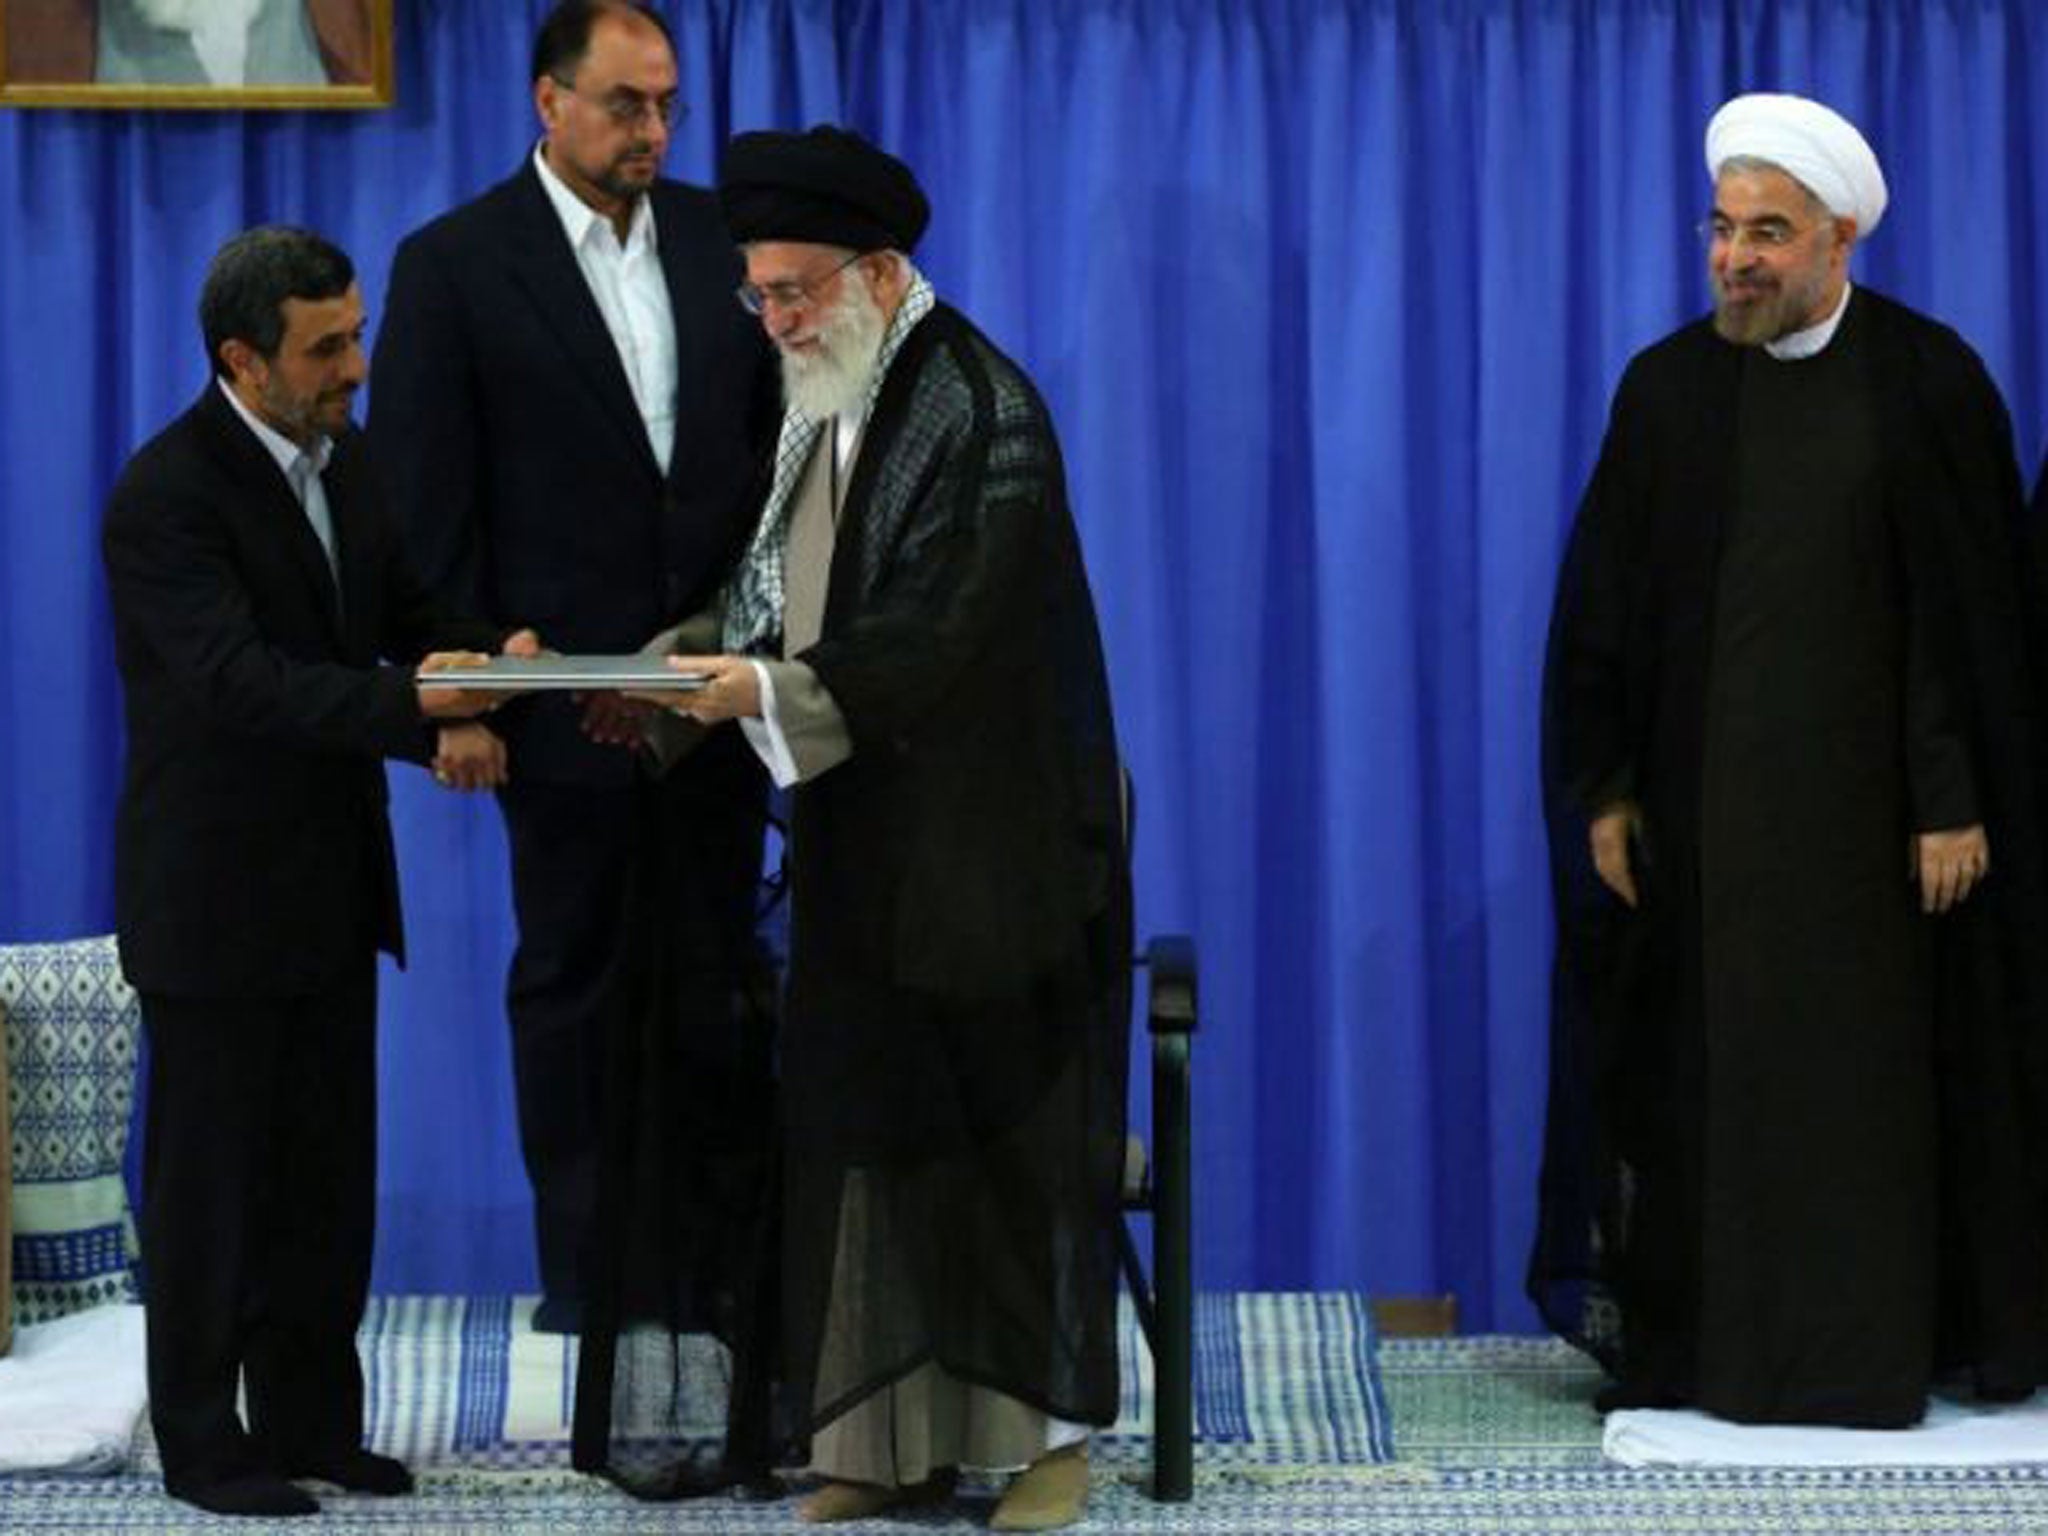 Hussan Rowhani officially becomes president after receiving the endorsement letter from ex-president Mahmoud Ahmadinejad